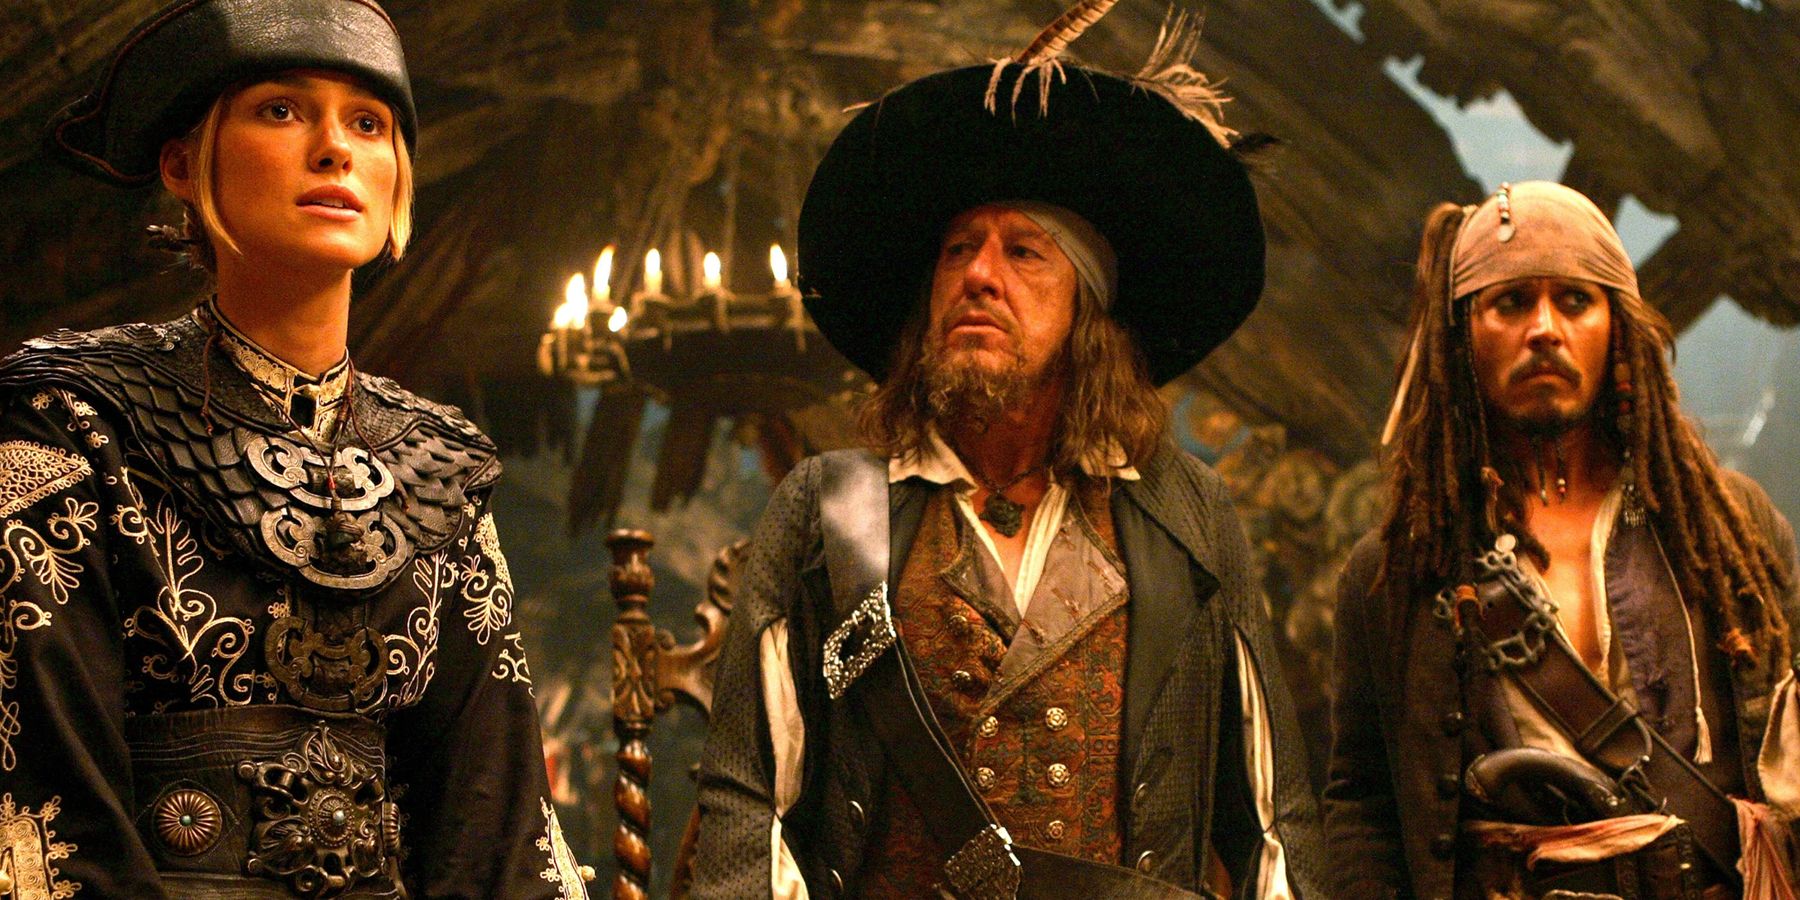 Pirates of the Carribbean At Worlds End elizabeth, barbossa and sparrow